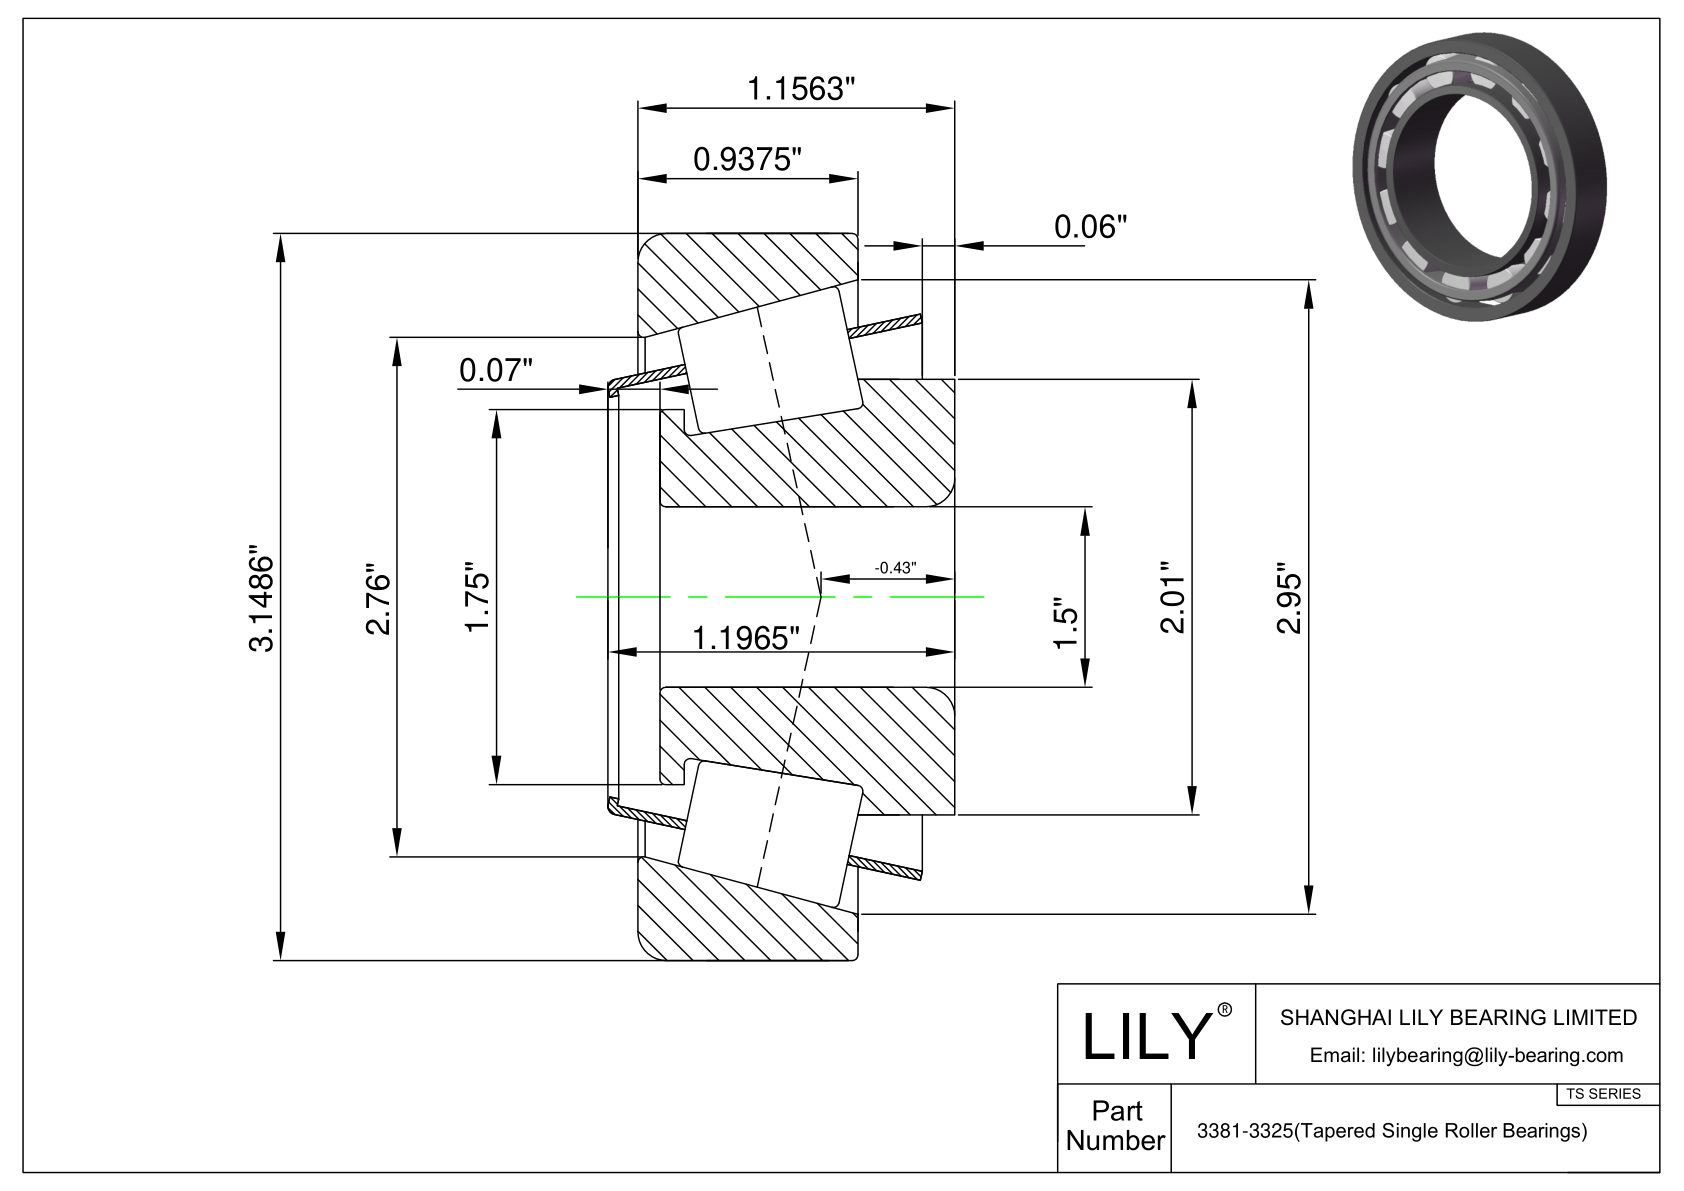 3381-3325 TS (Tapered Single Roller Bearings) (Imperial) cad drawing